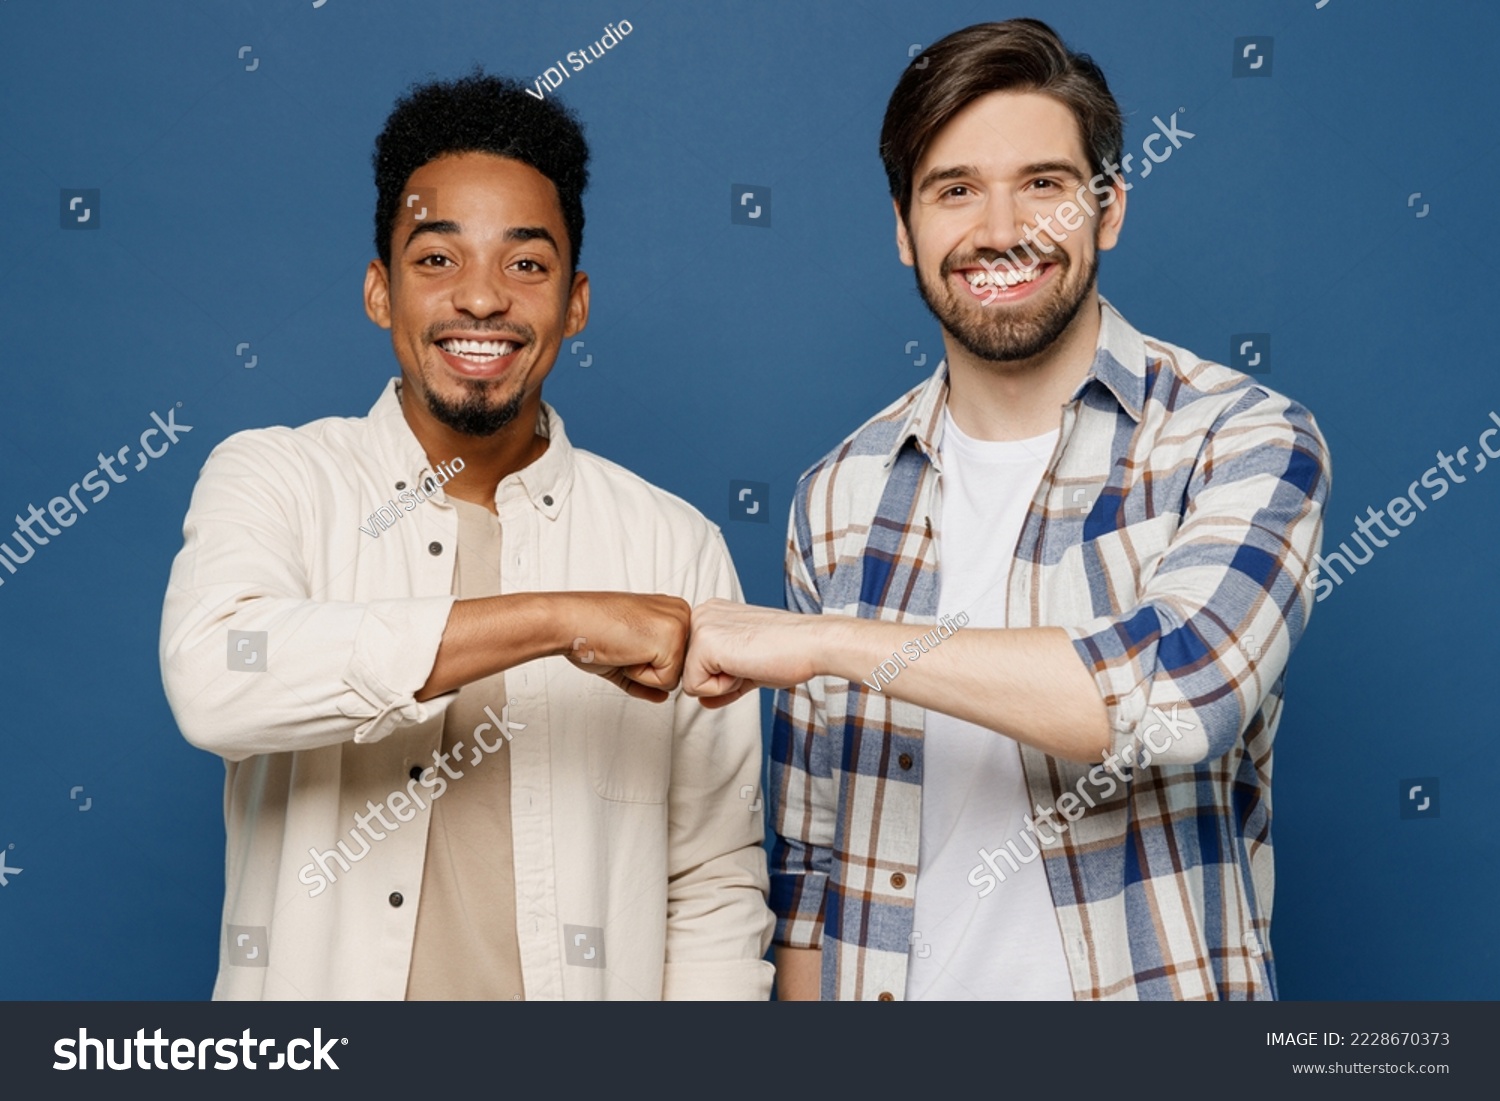 Young two friends cheerful cool smiling men 20s wear white casual shirts looking camera together give fistbump isolated plain dark royal navy blue background studio portrait. People lifestyle concept #2228670373